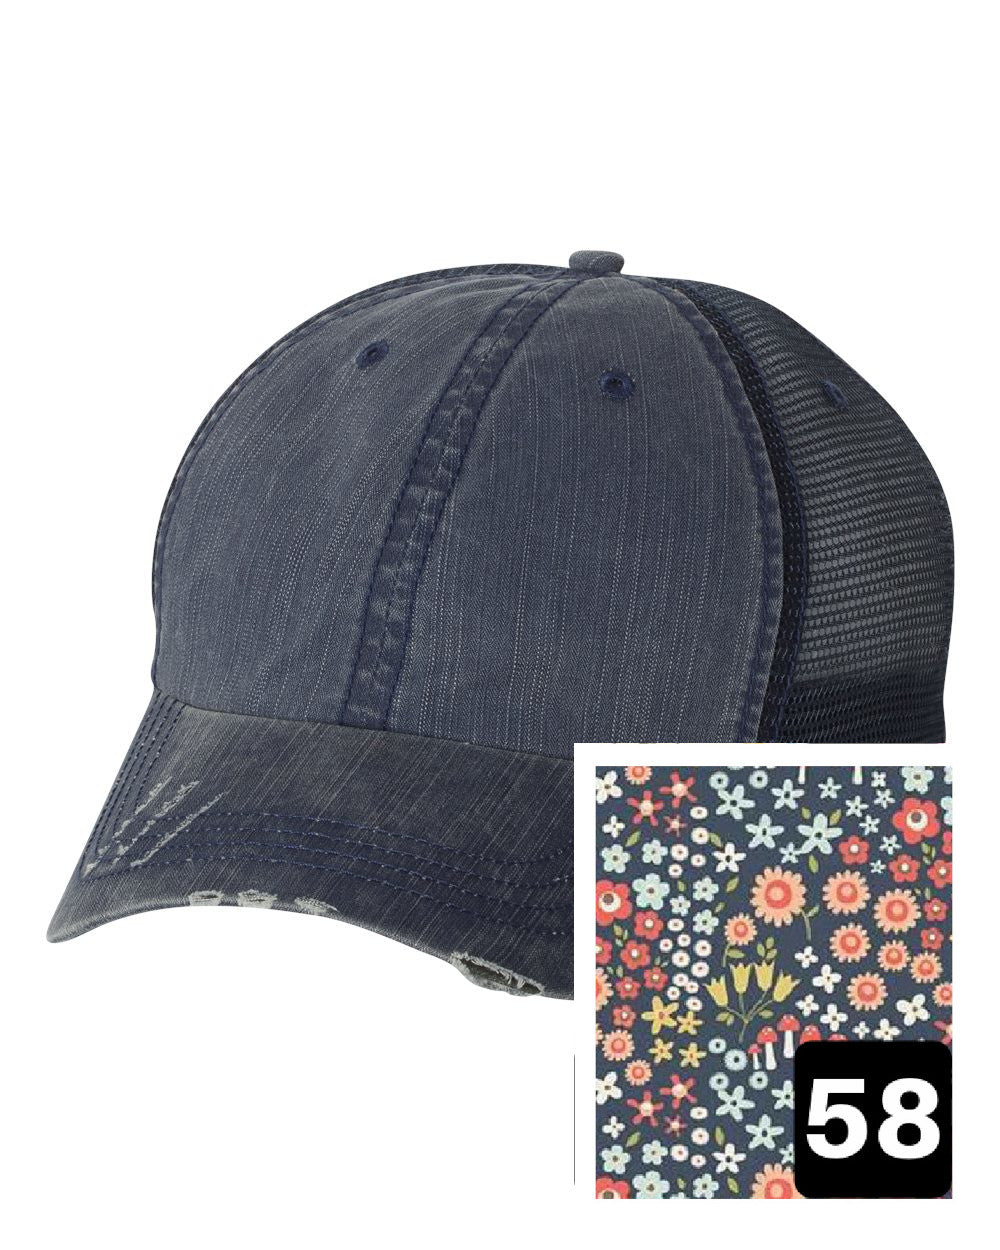 New Jersey Hat | Navy Distressed Trucker Cap | Many Fabric Choices